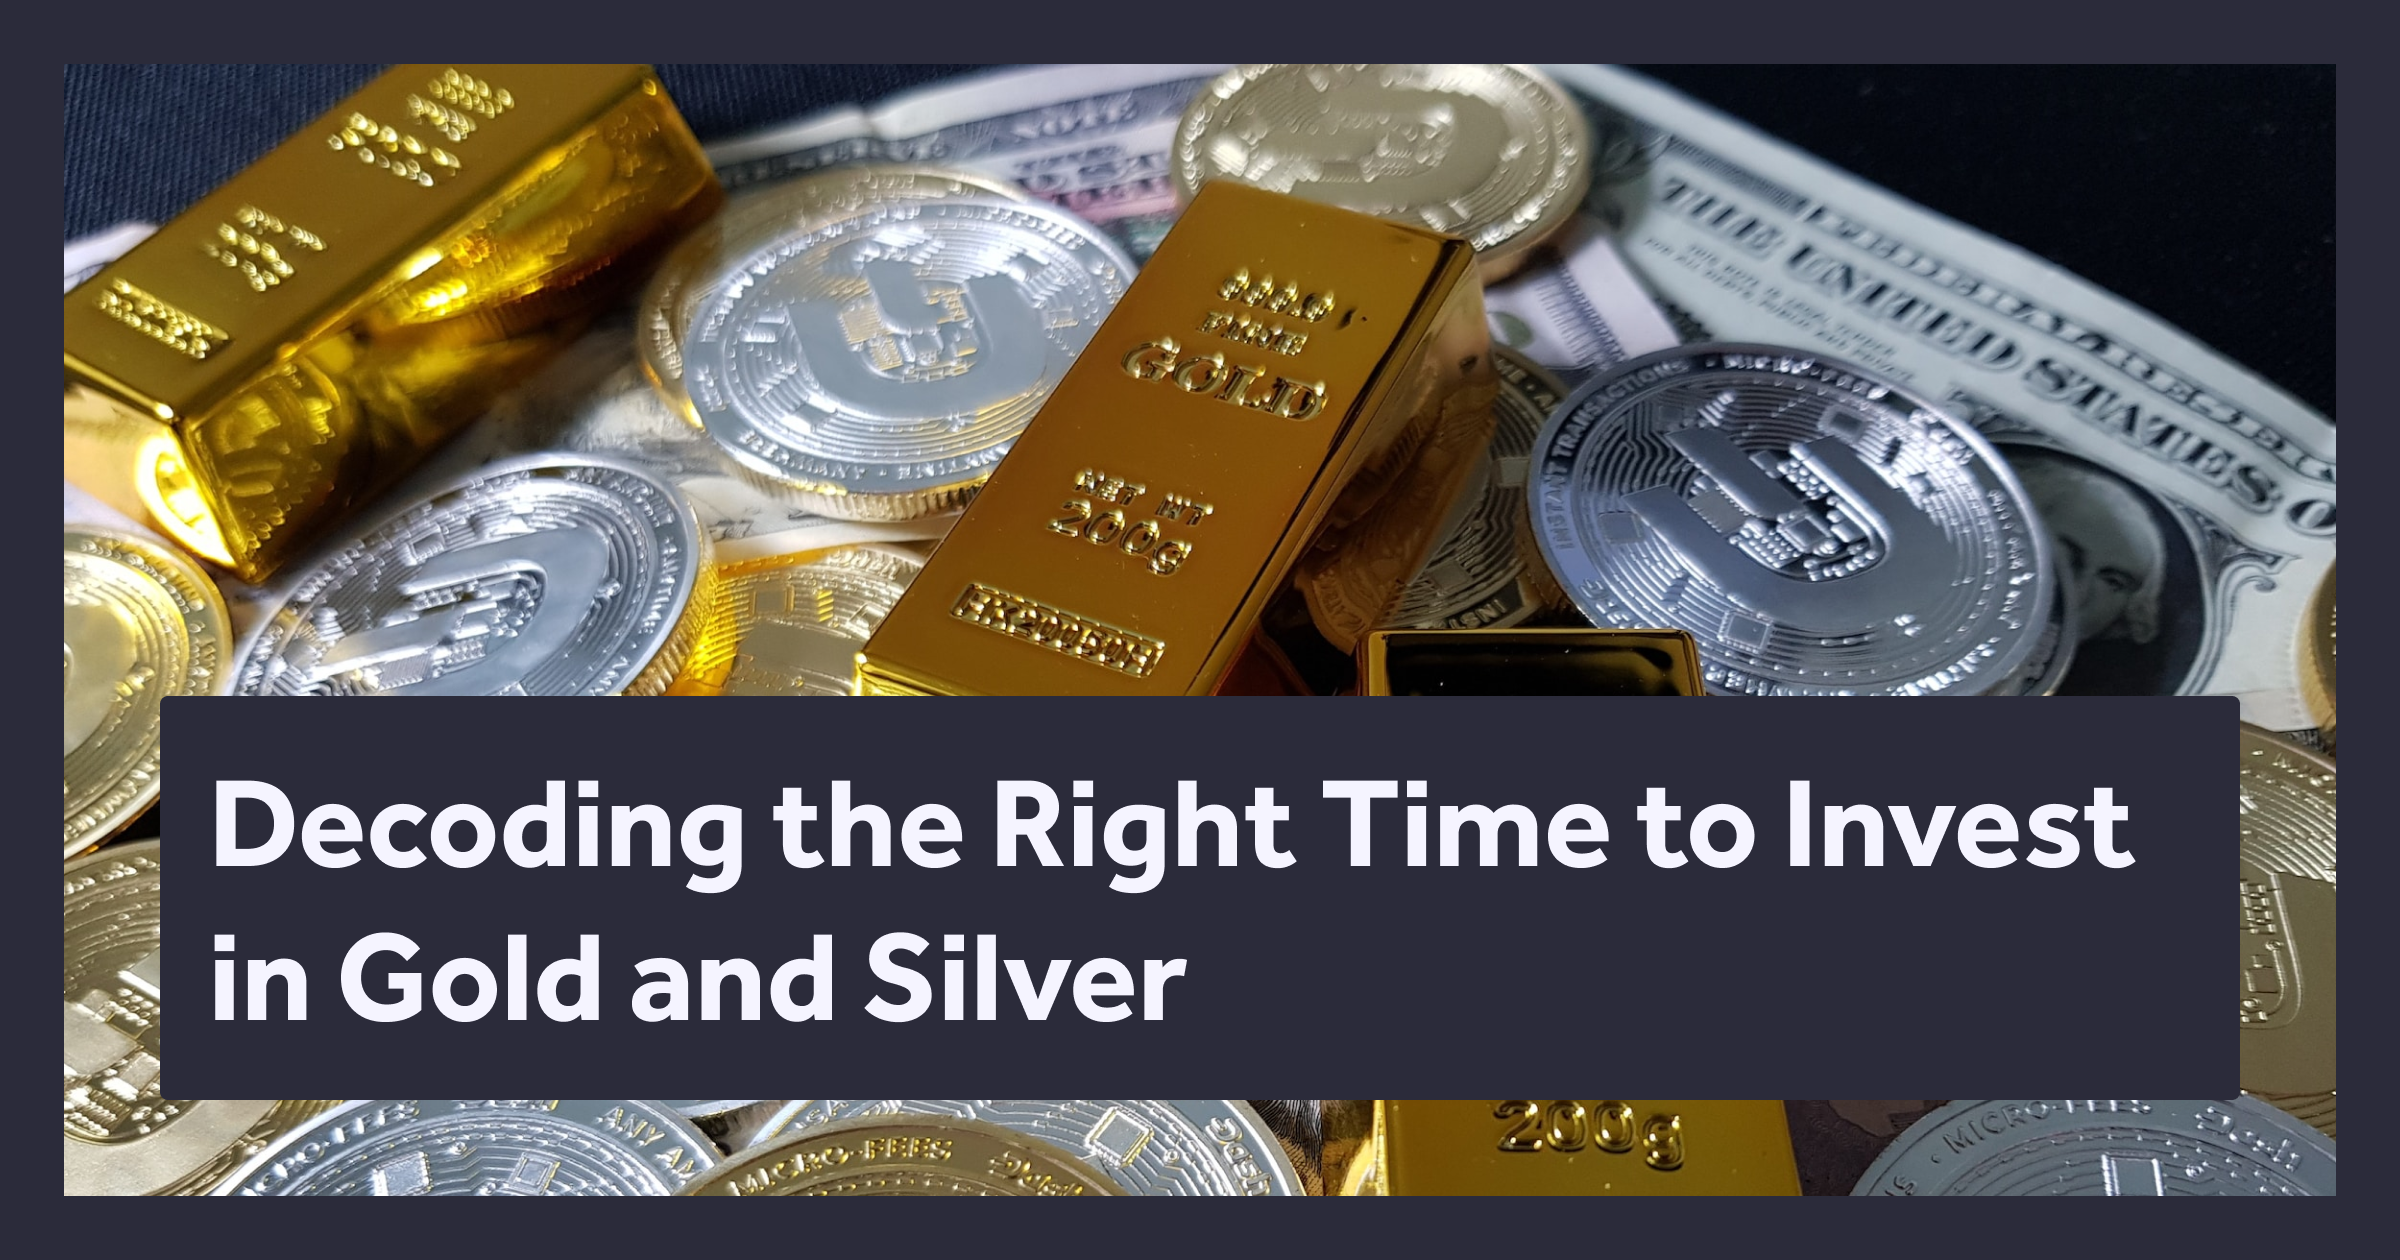 Blog on Decoding the Right Time to Invest in Gold and Silver